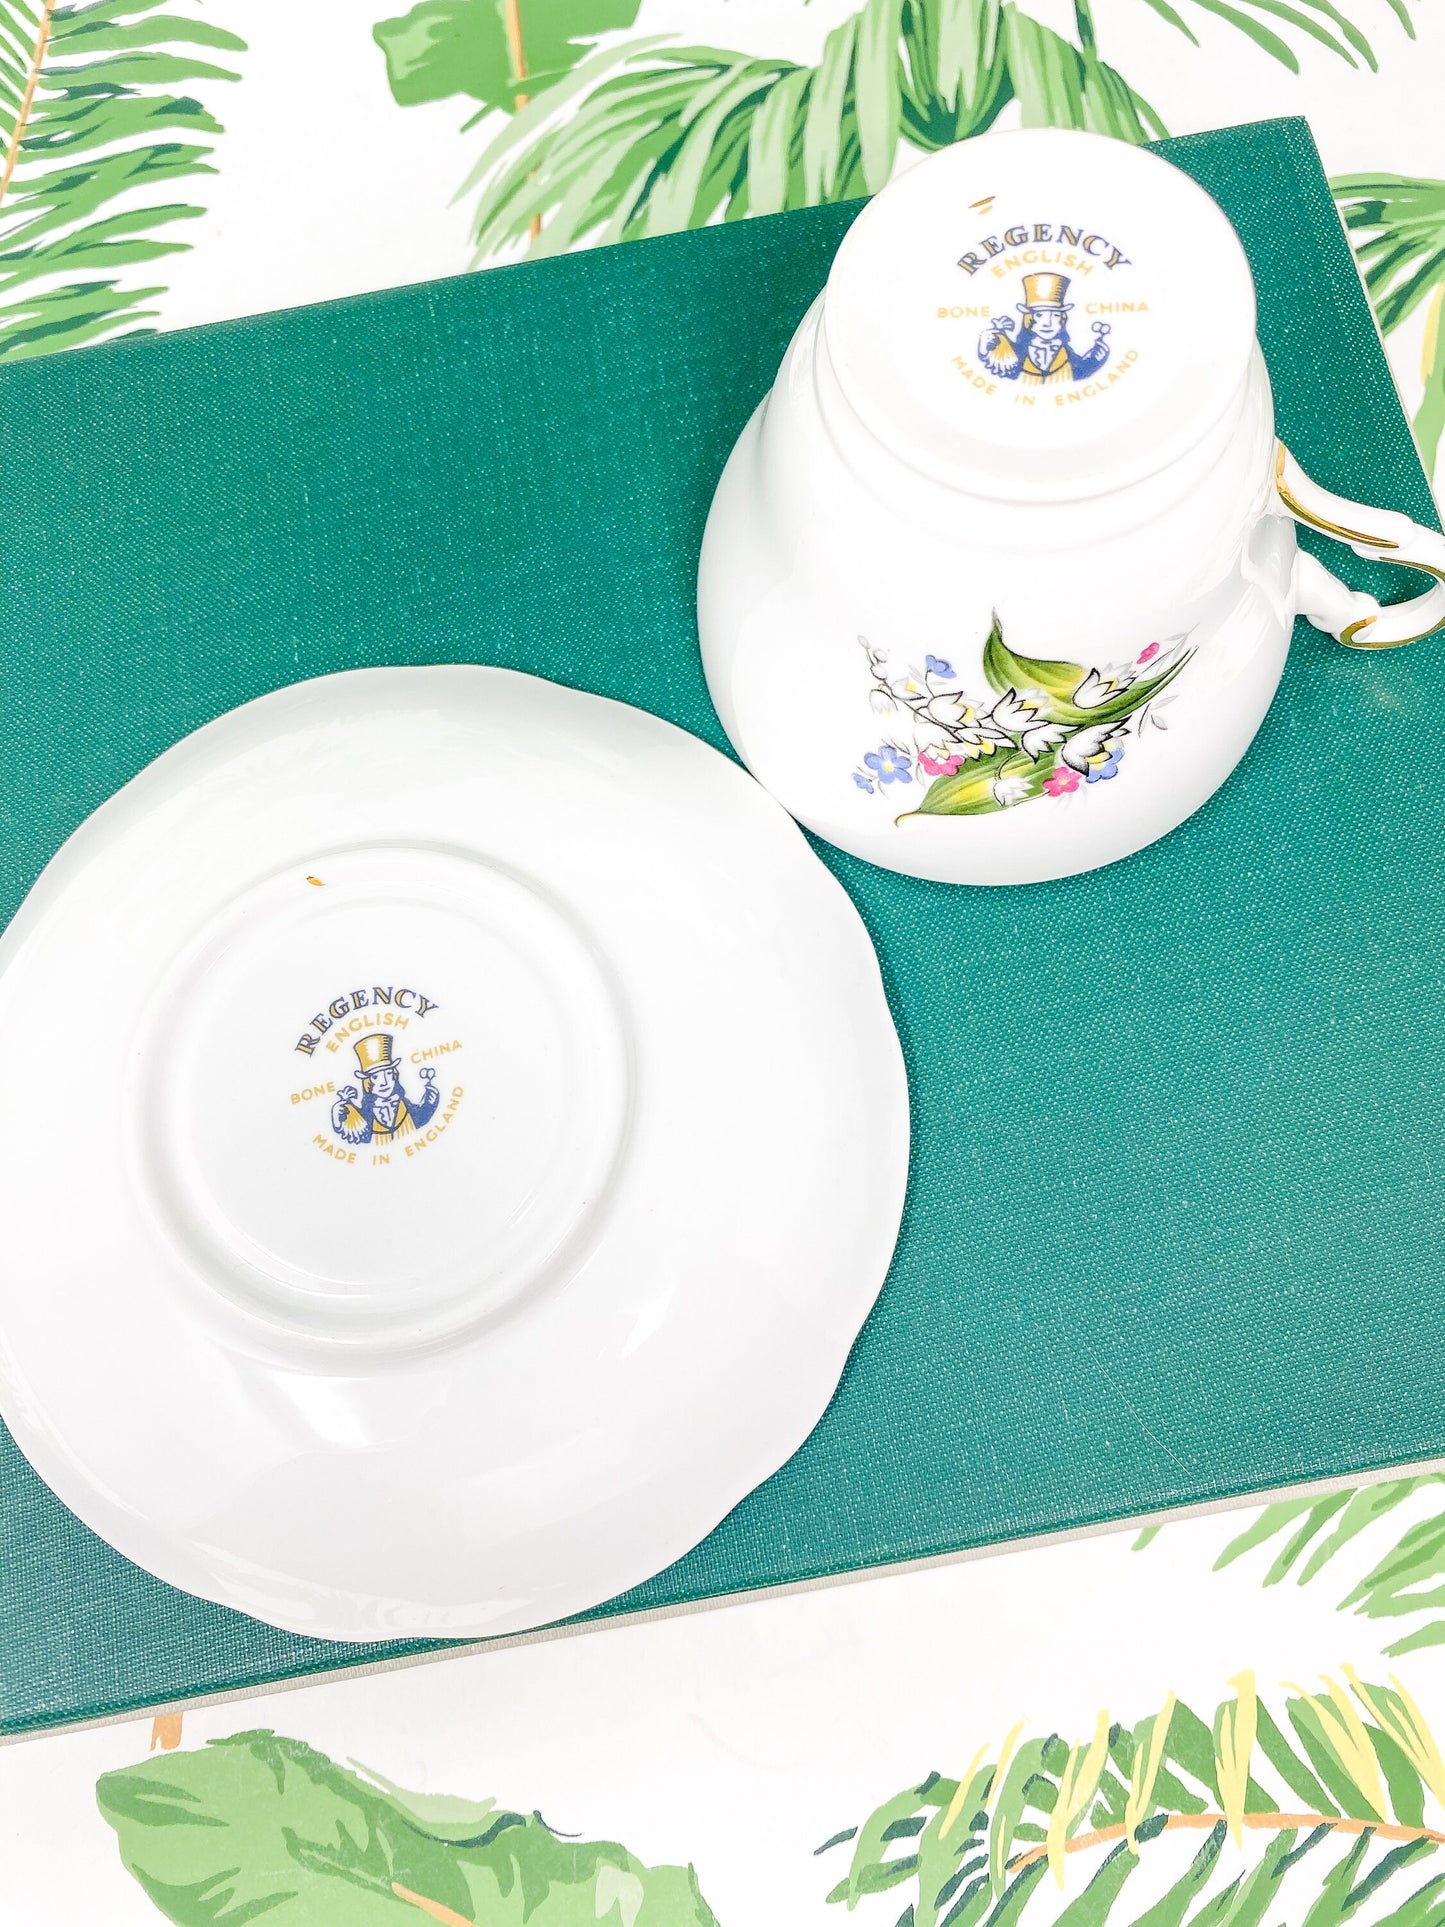 Vintage Lily of the Valley Teacup and Saucer - Regency China